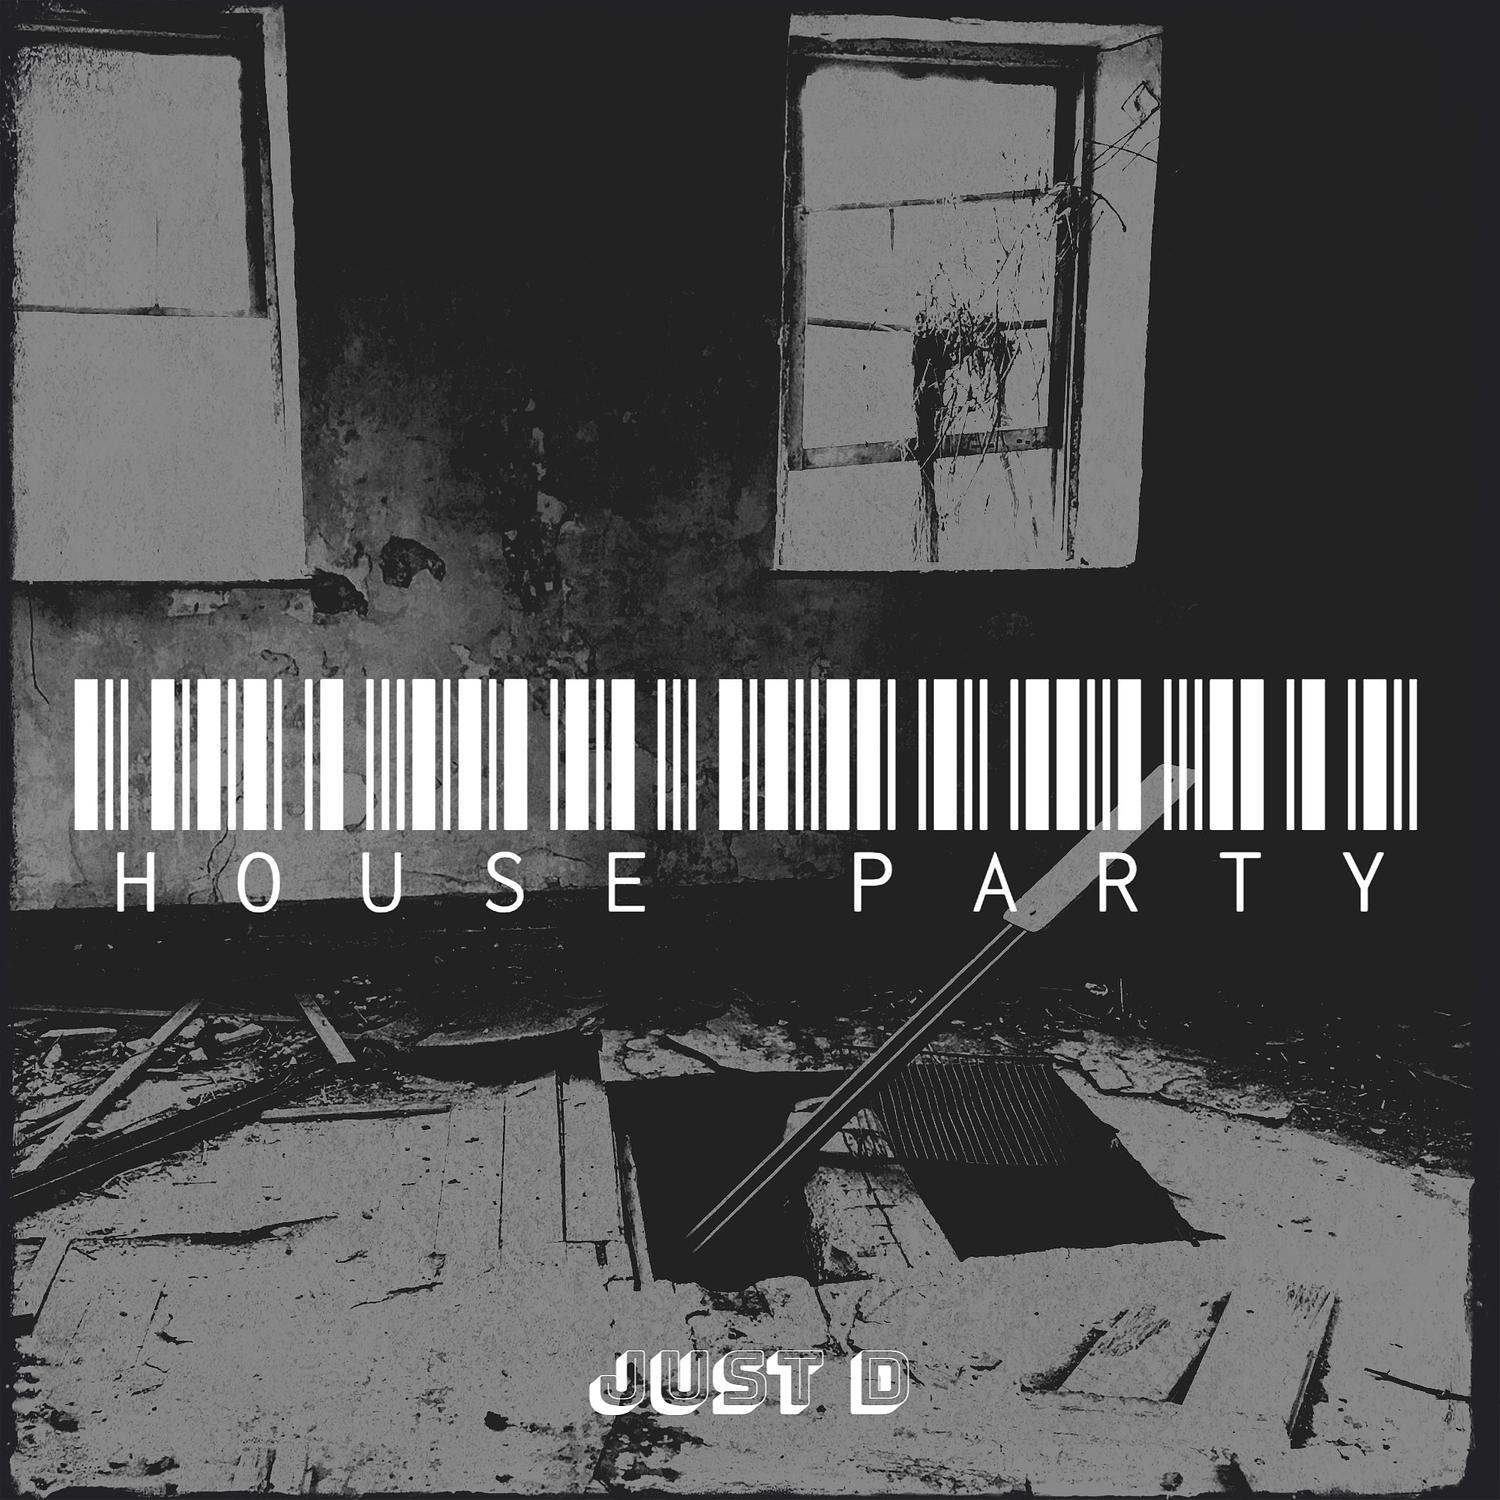 Just D - House Party